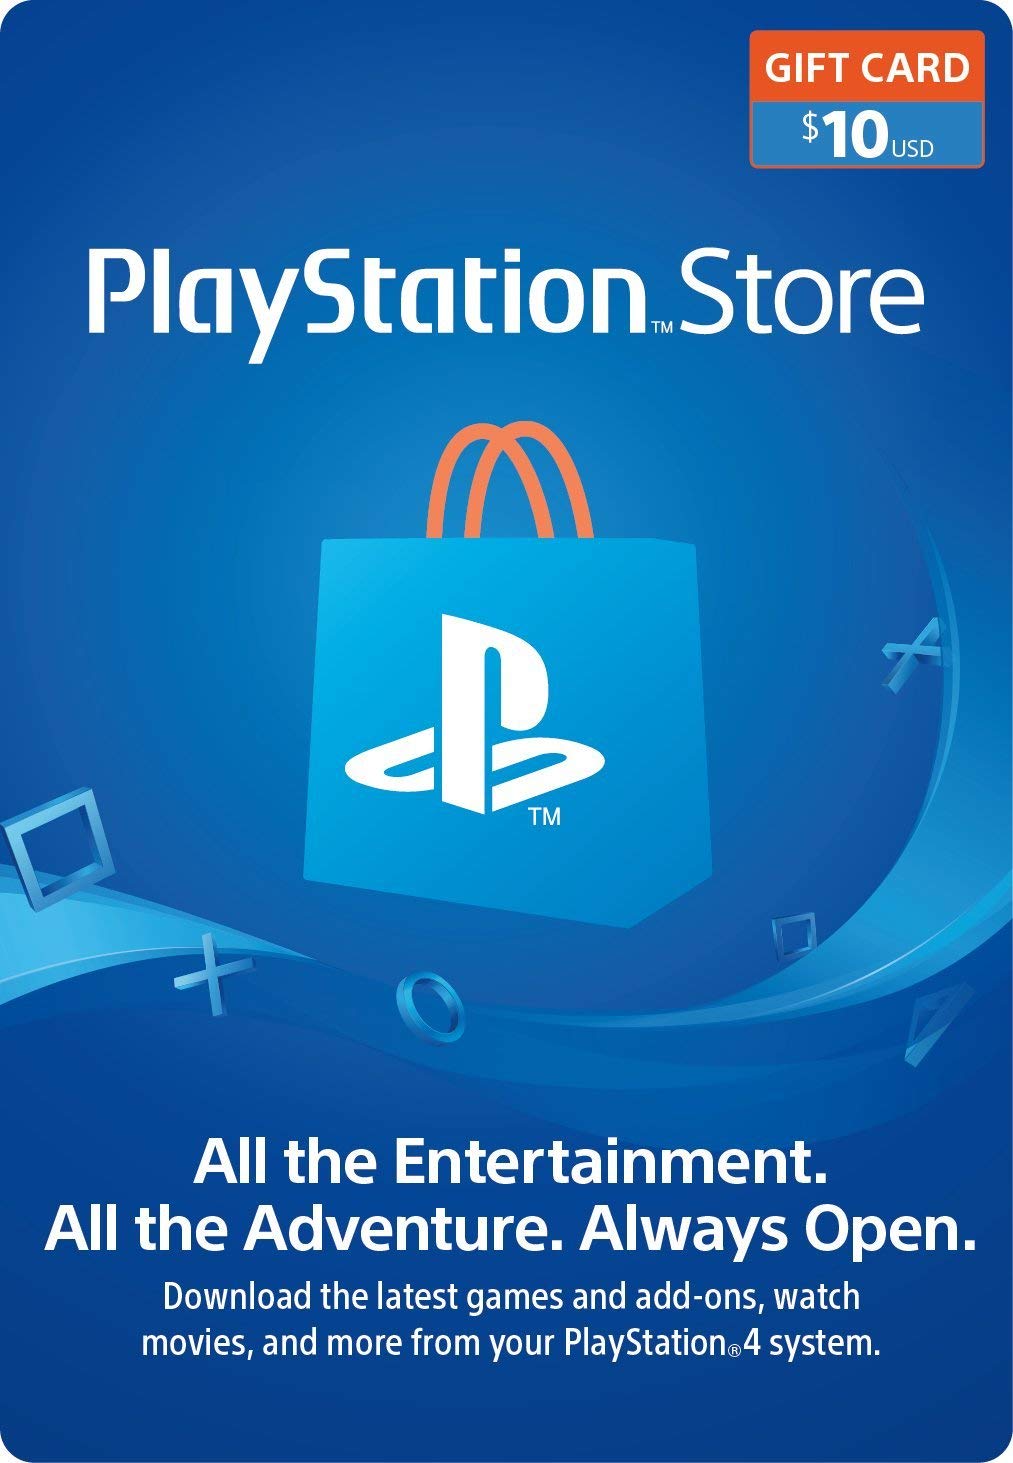 PS Store gift card $10 